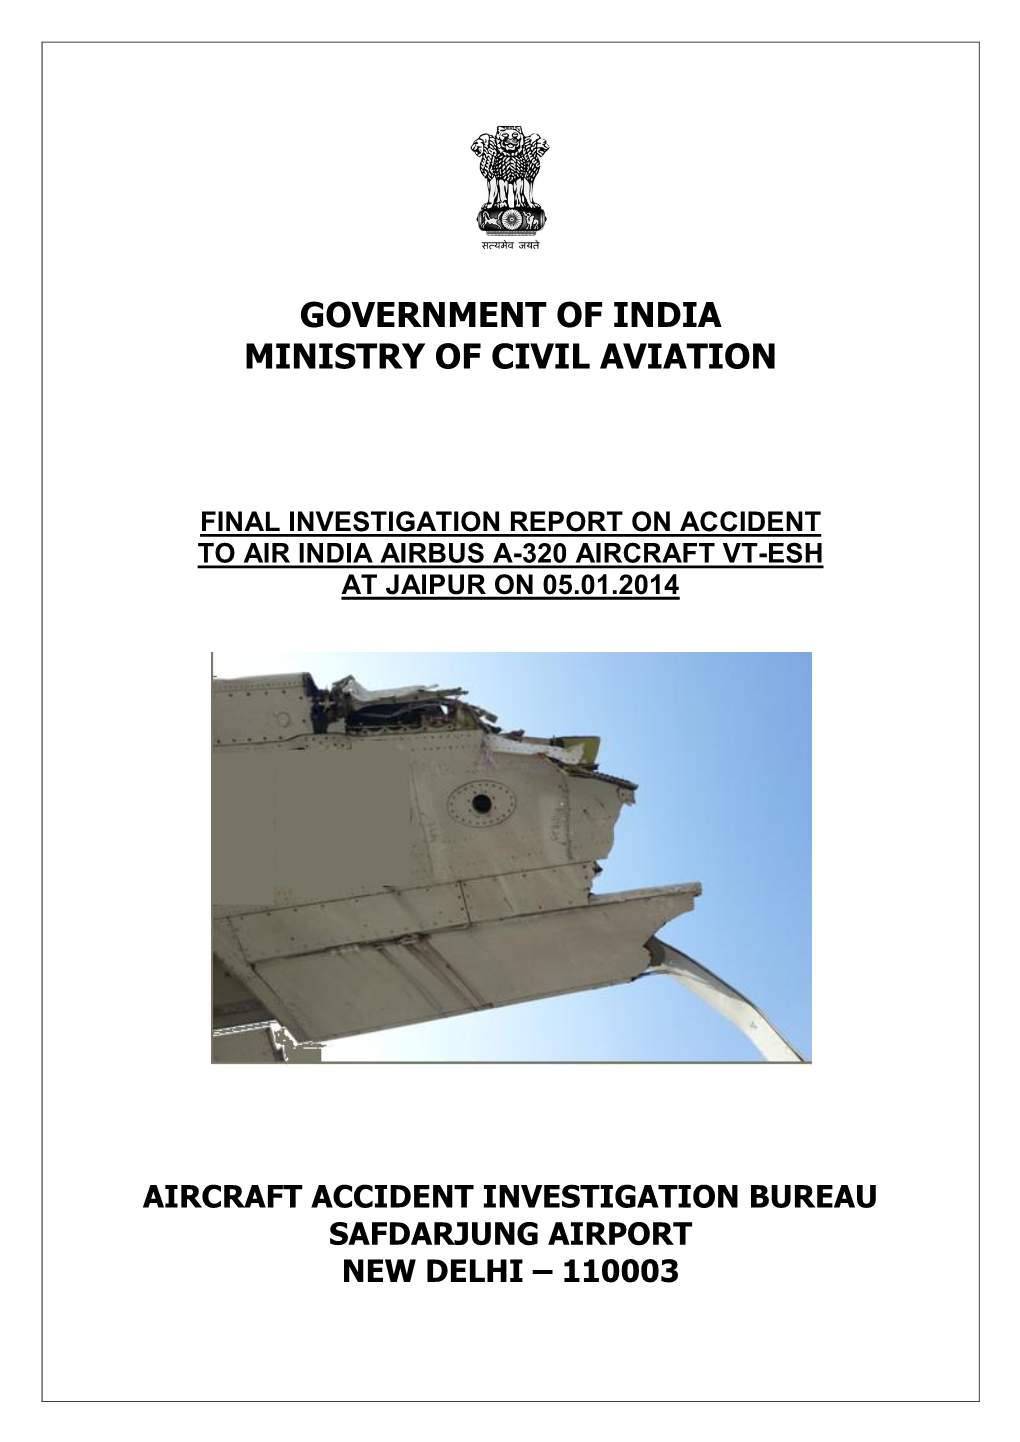 Final Investigation Report on Accident to Air India Airbus 320 Aircraft VT